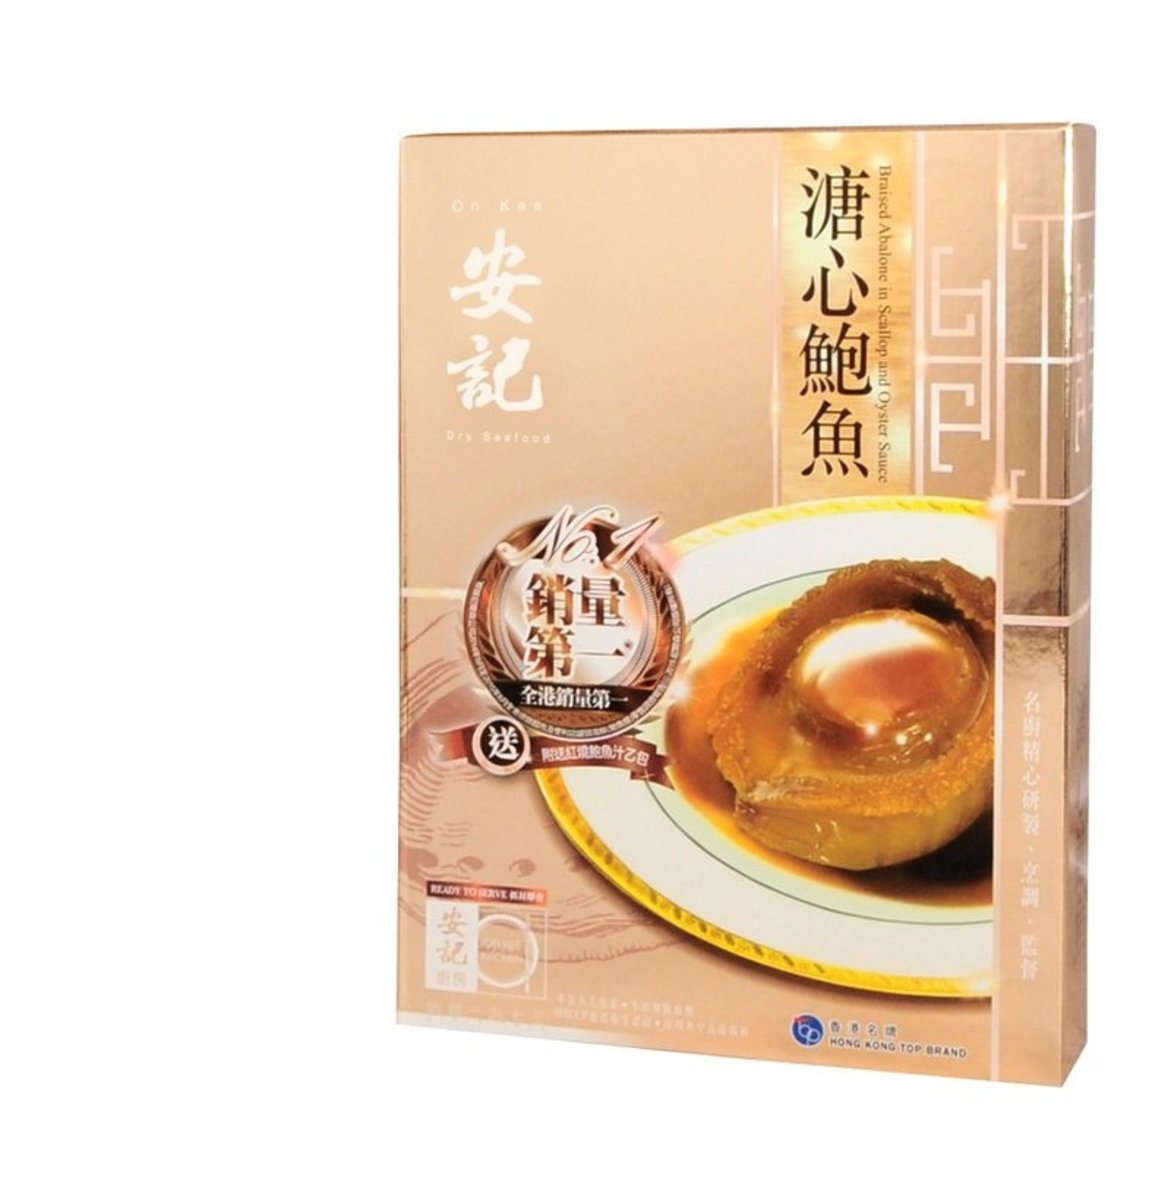 6 pcs Braised Abalone in Scallop and Oyster Sauce【Product of Taiwan】